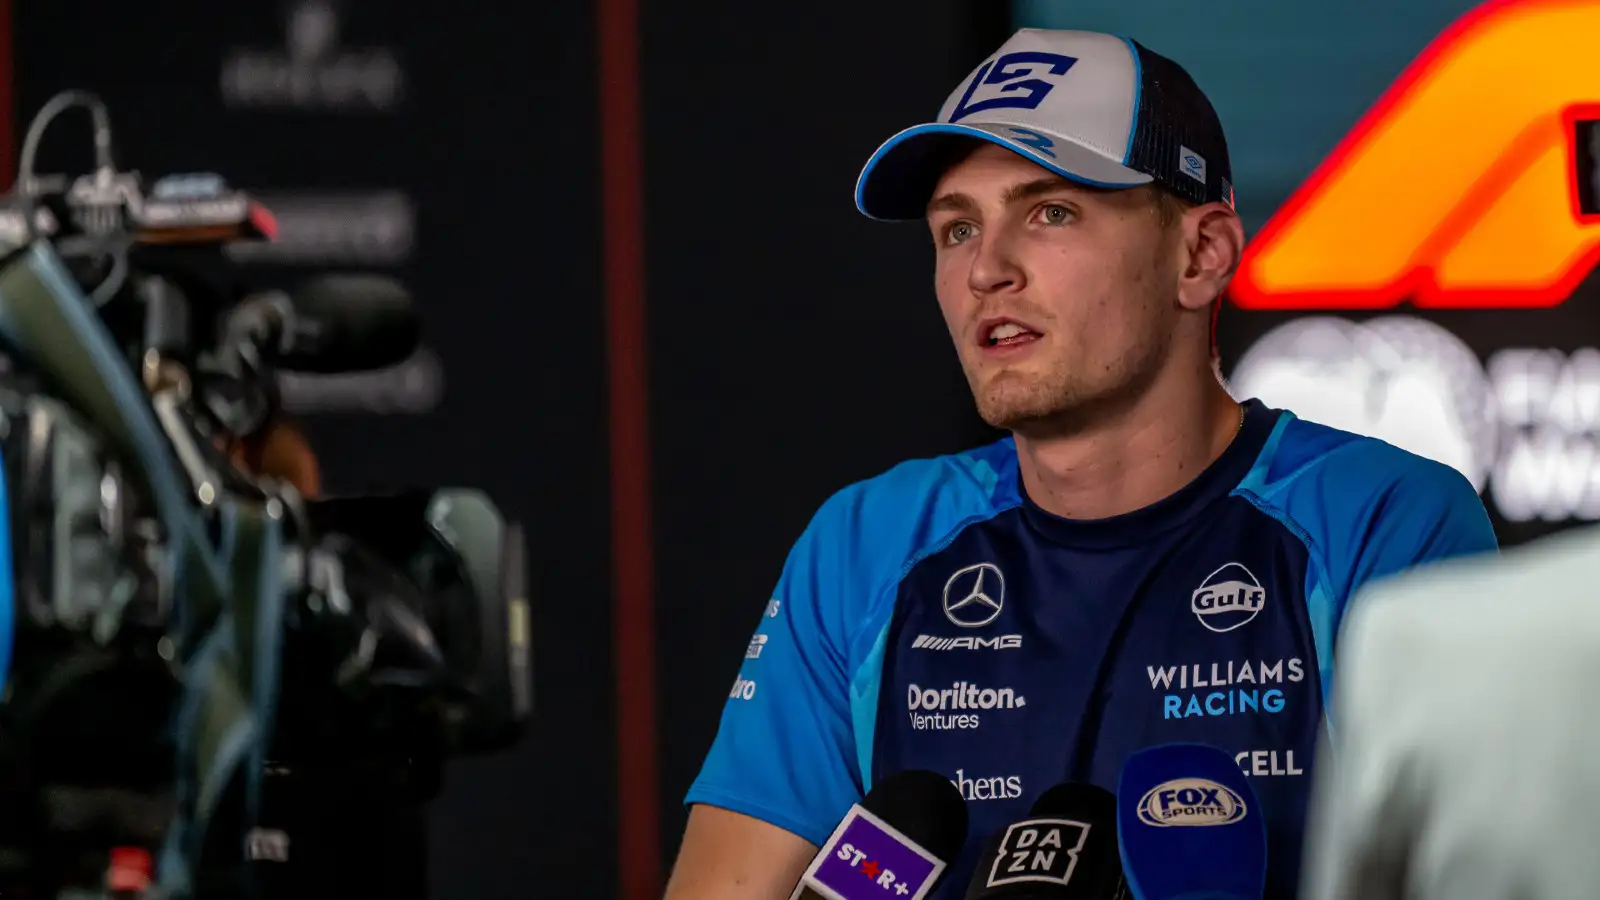 Williams driver Logan Sargeant speaks to the media during the Qatar Grand Prix. F1 news